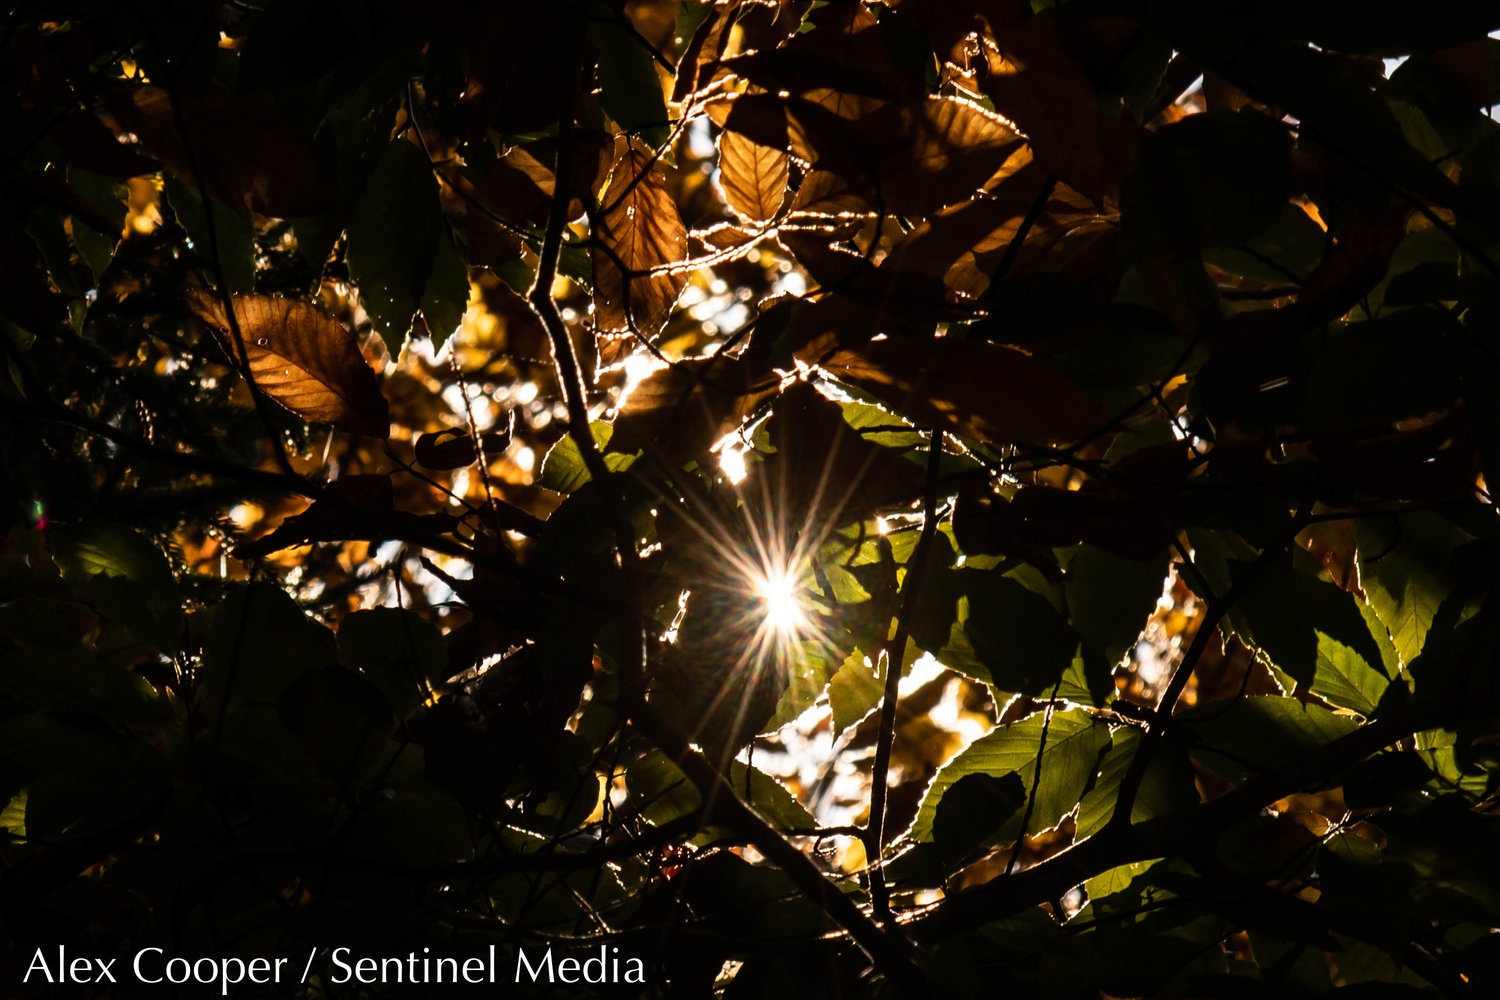 The sun peeks through leaves at McCauley Mountain on Wednesday, Oct. 5 in Old Forge.